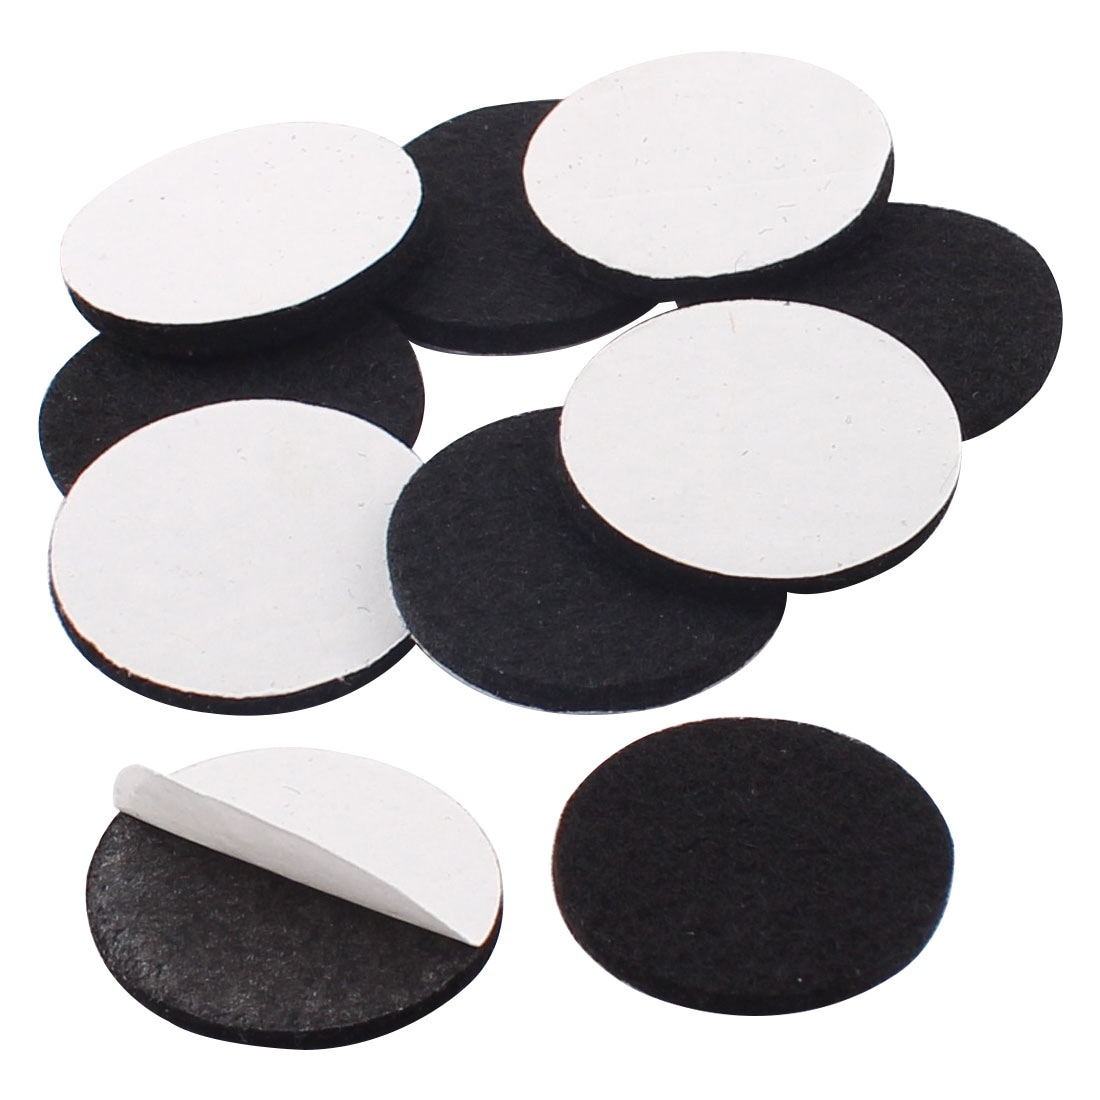 https://ak1.ostkcdn.com/images/products/is/images/direct/d837314745f6f7191fbb3fdef3cdc210d083c240/Household-Self-Adhesive-Protect-Furniture-Felt-Pads-Mats-Black-30mm-10pcs.jpg